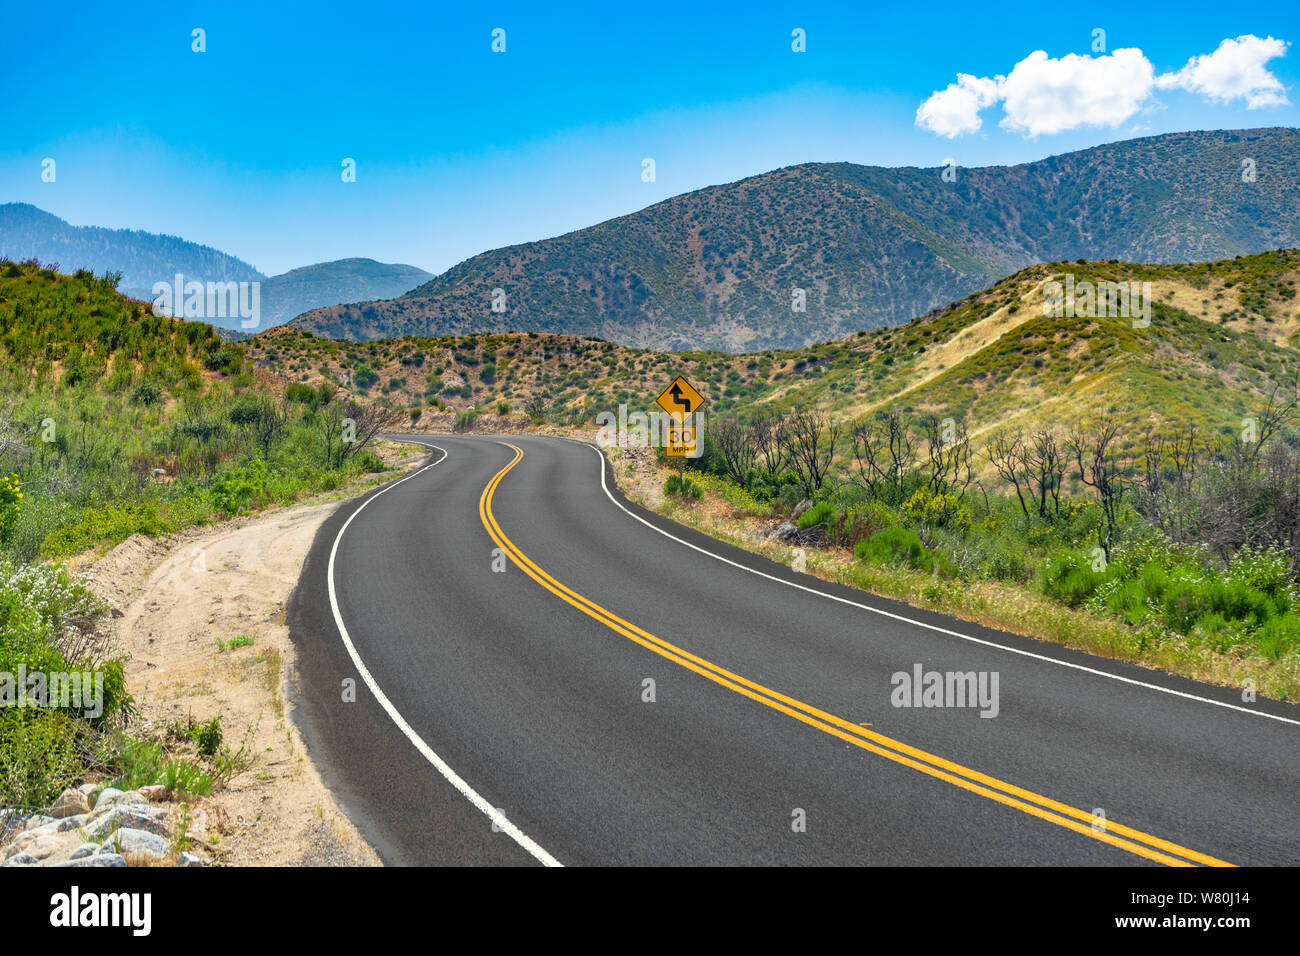 Curved mountain road with 30 MPH caution road sign Stock Photo